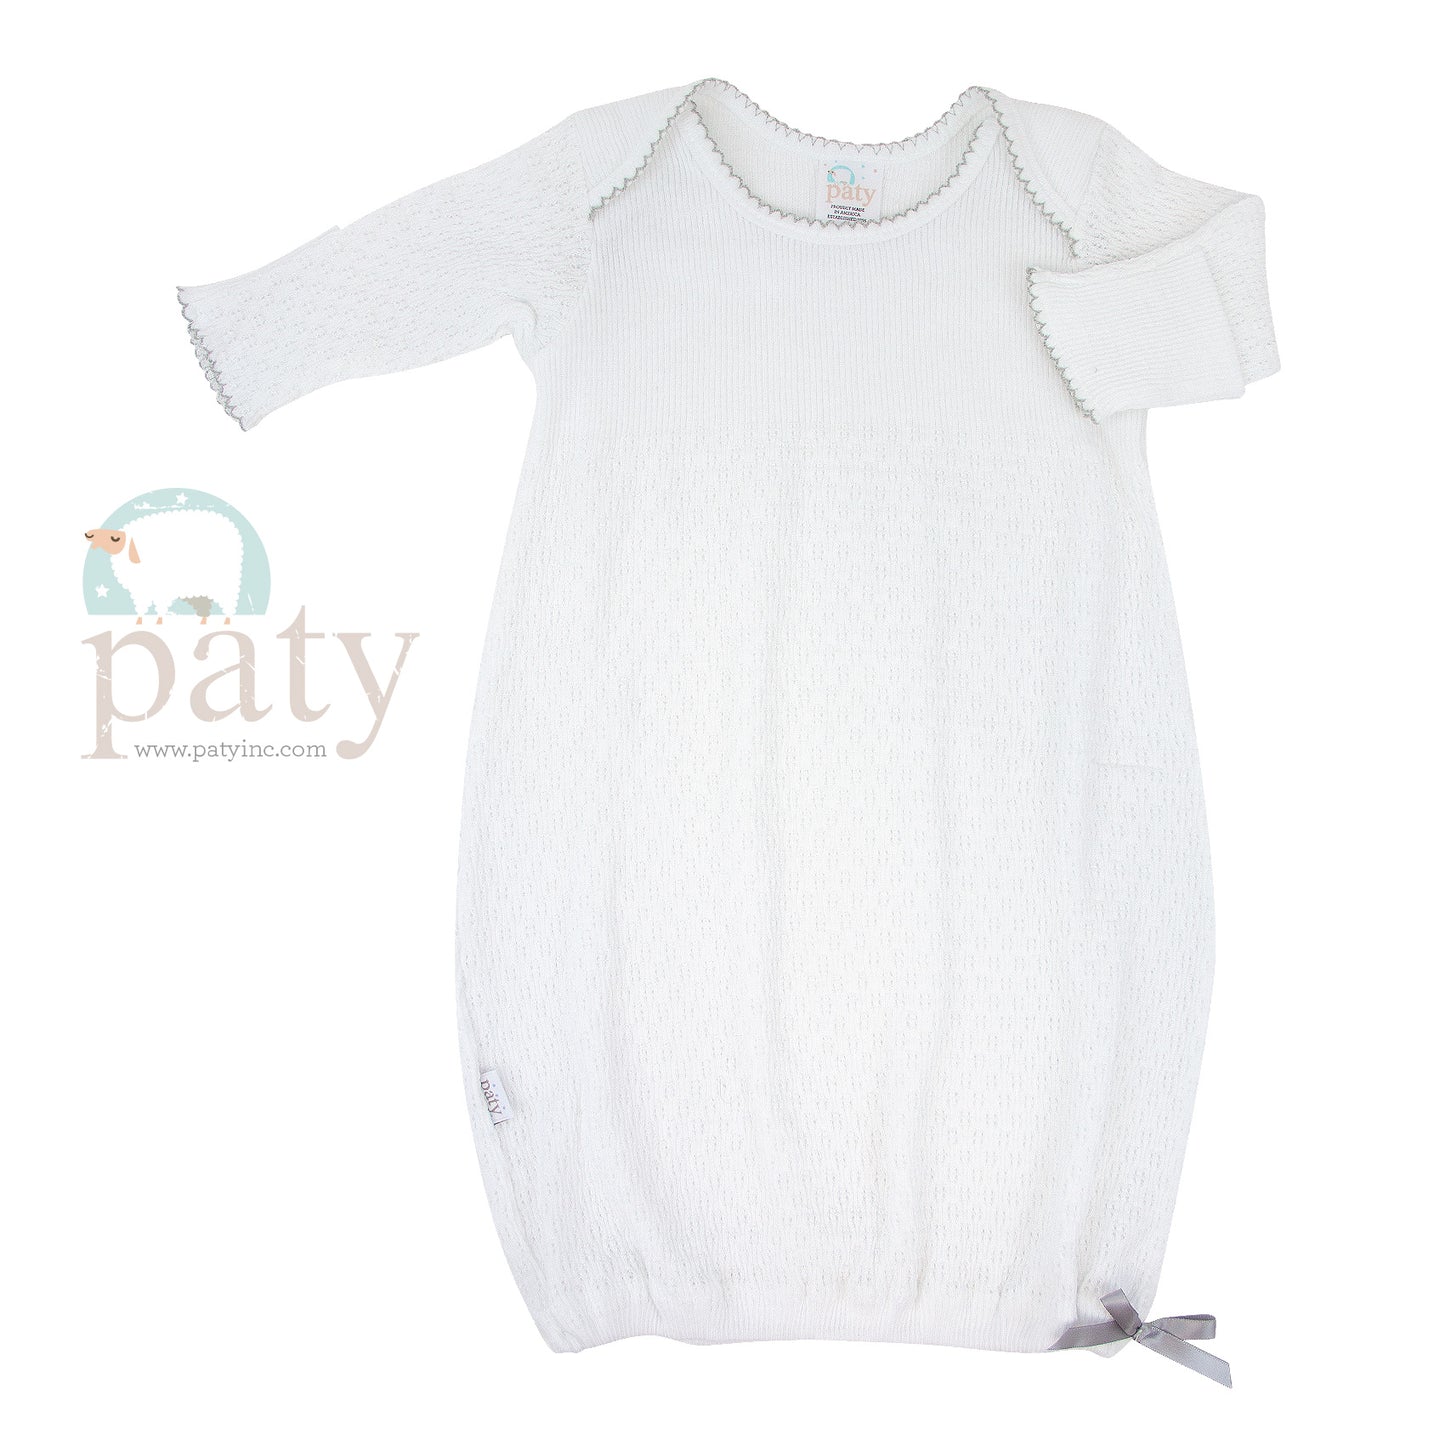 A white Paty baby gown with a grey bow, featuring an easy-access design.